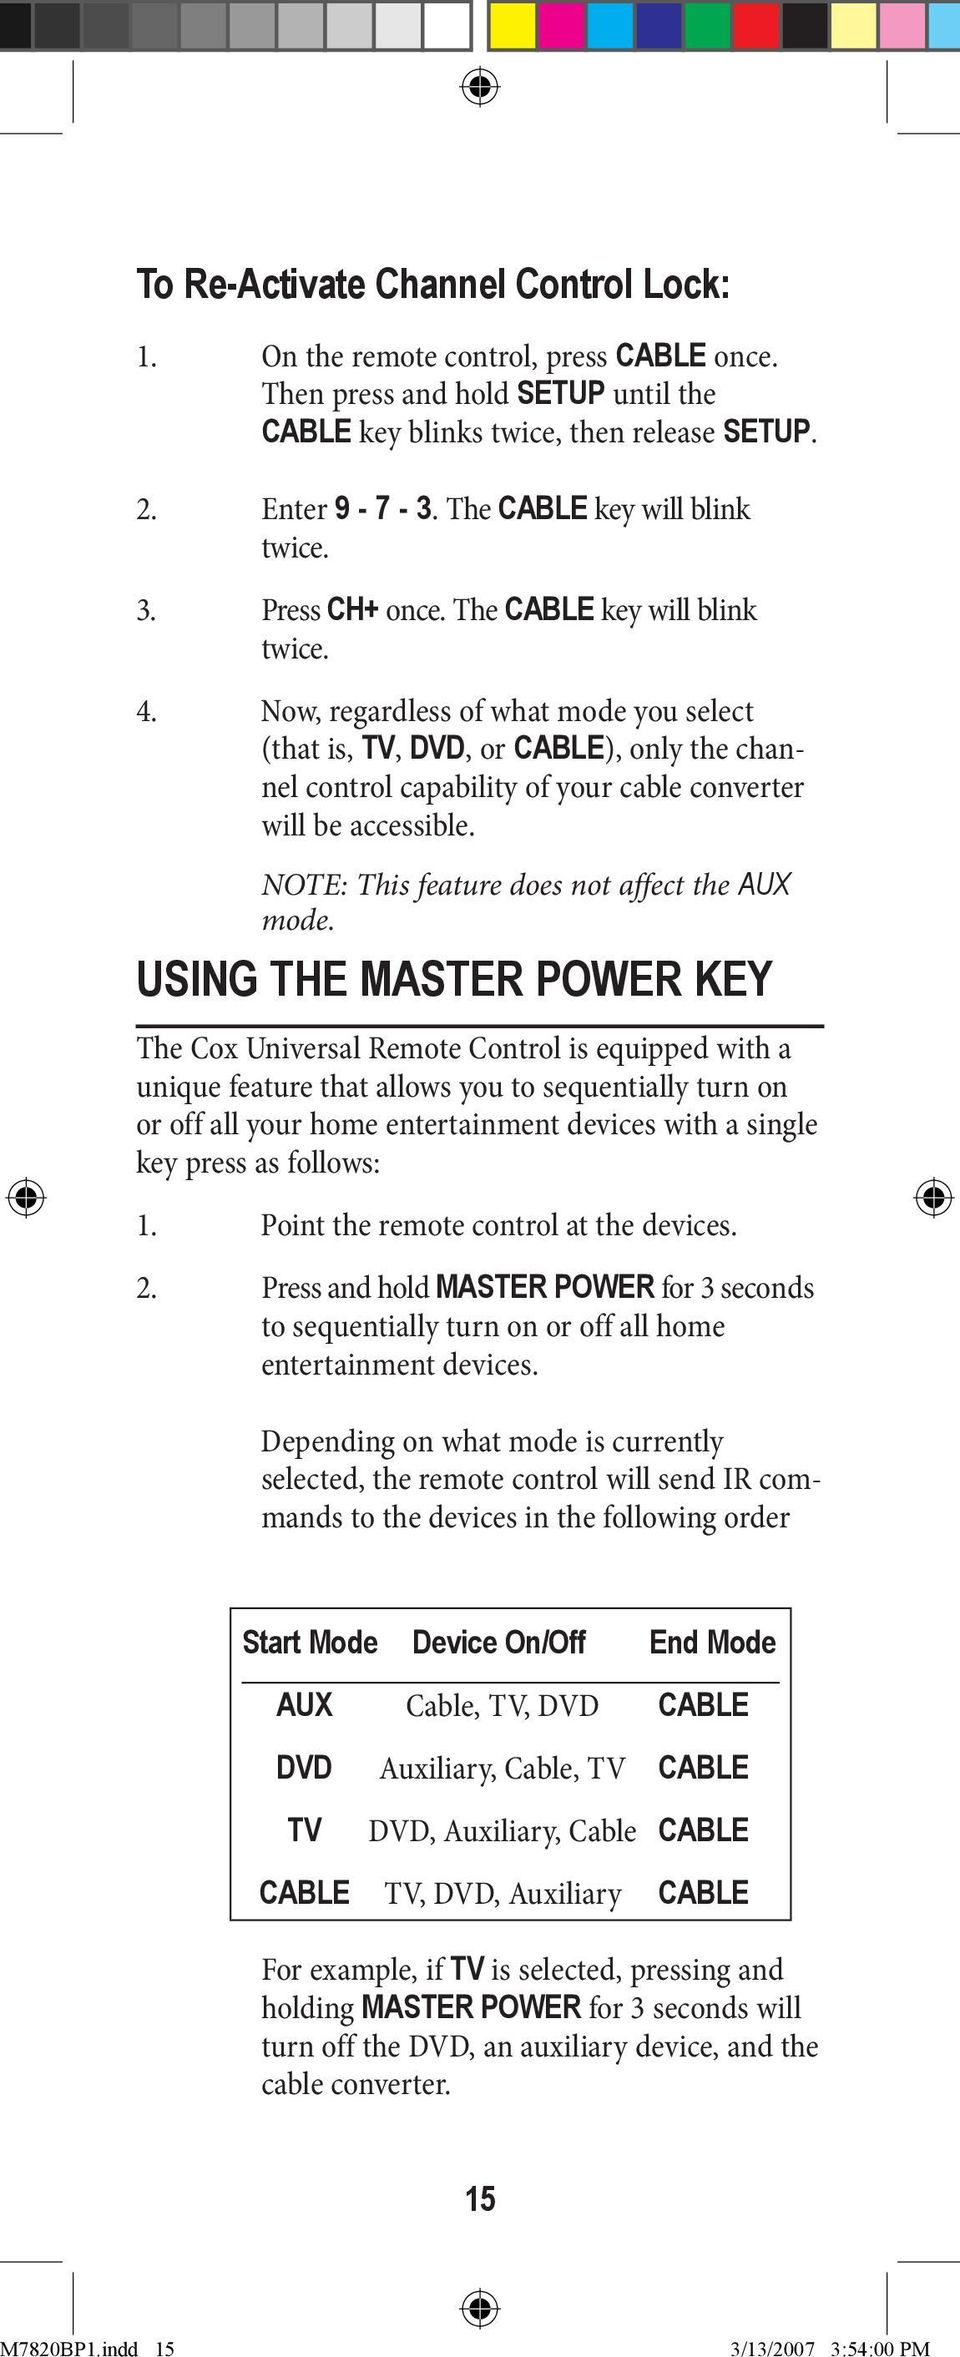 Now, regardless of what mode you select (that is, TV, DVD, or CABLE), only the channel control capability of your cable converter will be accessible. NOTE: This feature does not affect the AUX mode.